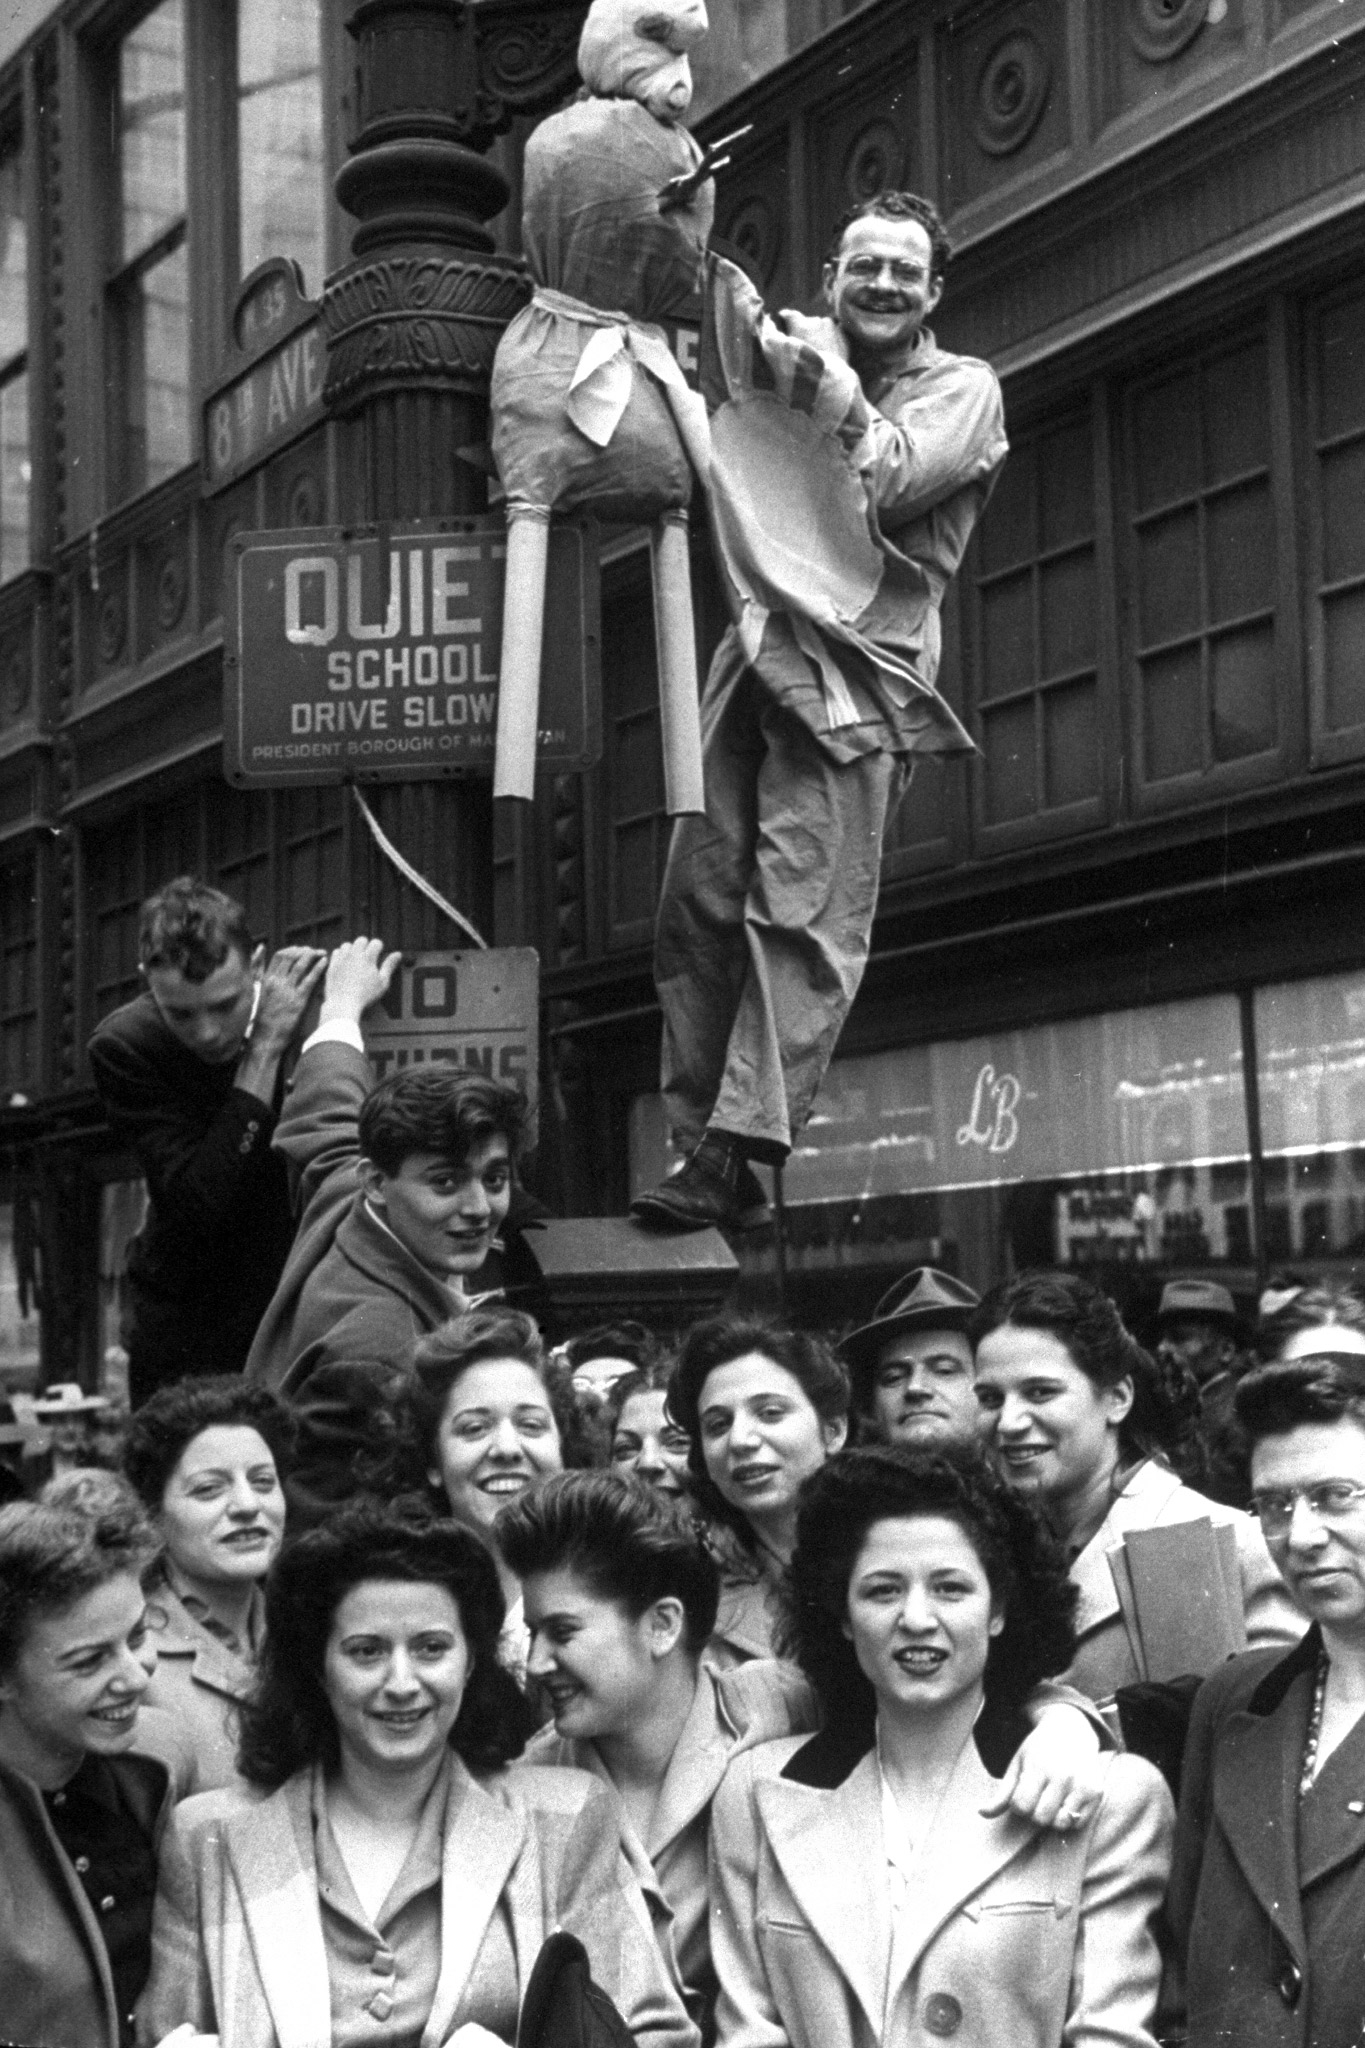 A Hitler dummy, with dagger in its heart and a Japanese flag on its chest, is exhibited on Eighth Avenue lamppost.